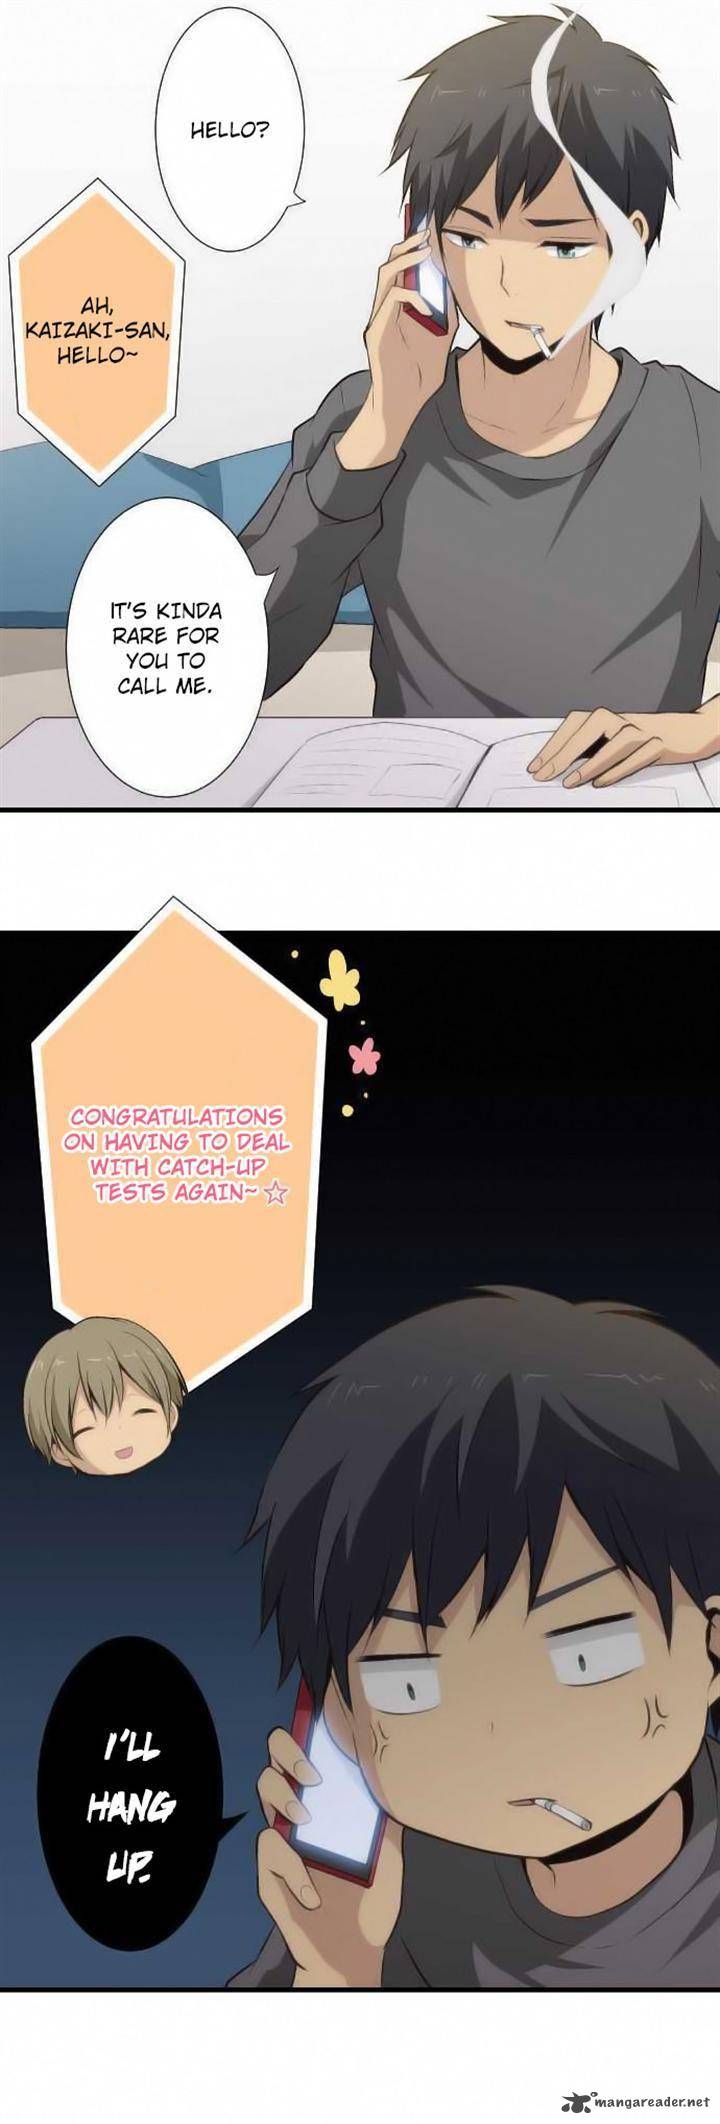 Relife 61 13